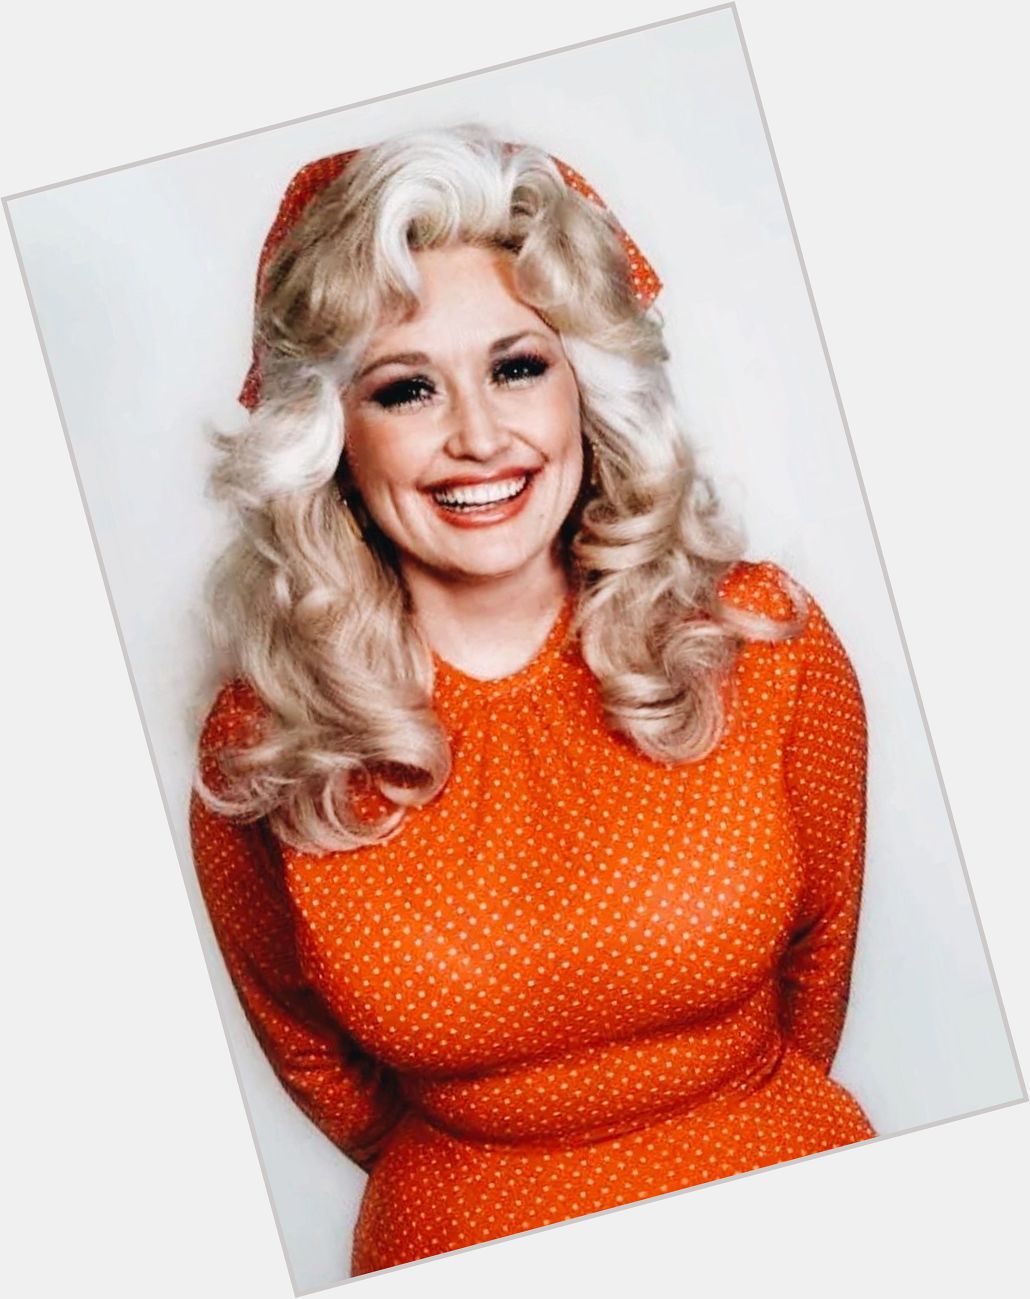 Happy birthday to the Queen of Tennessee, Miss Dolly Parton 